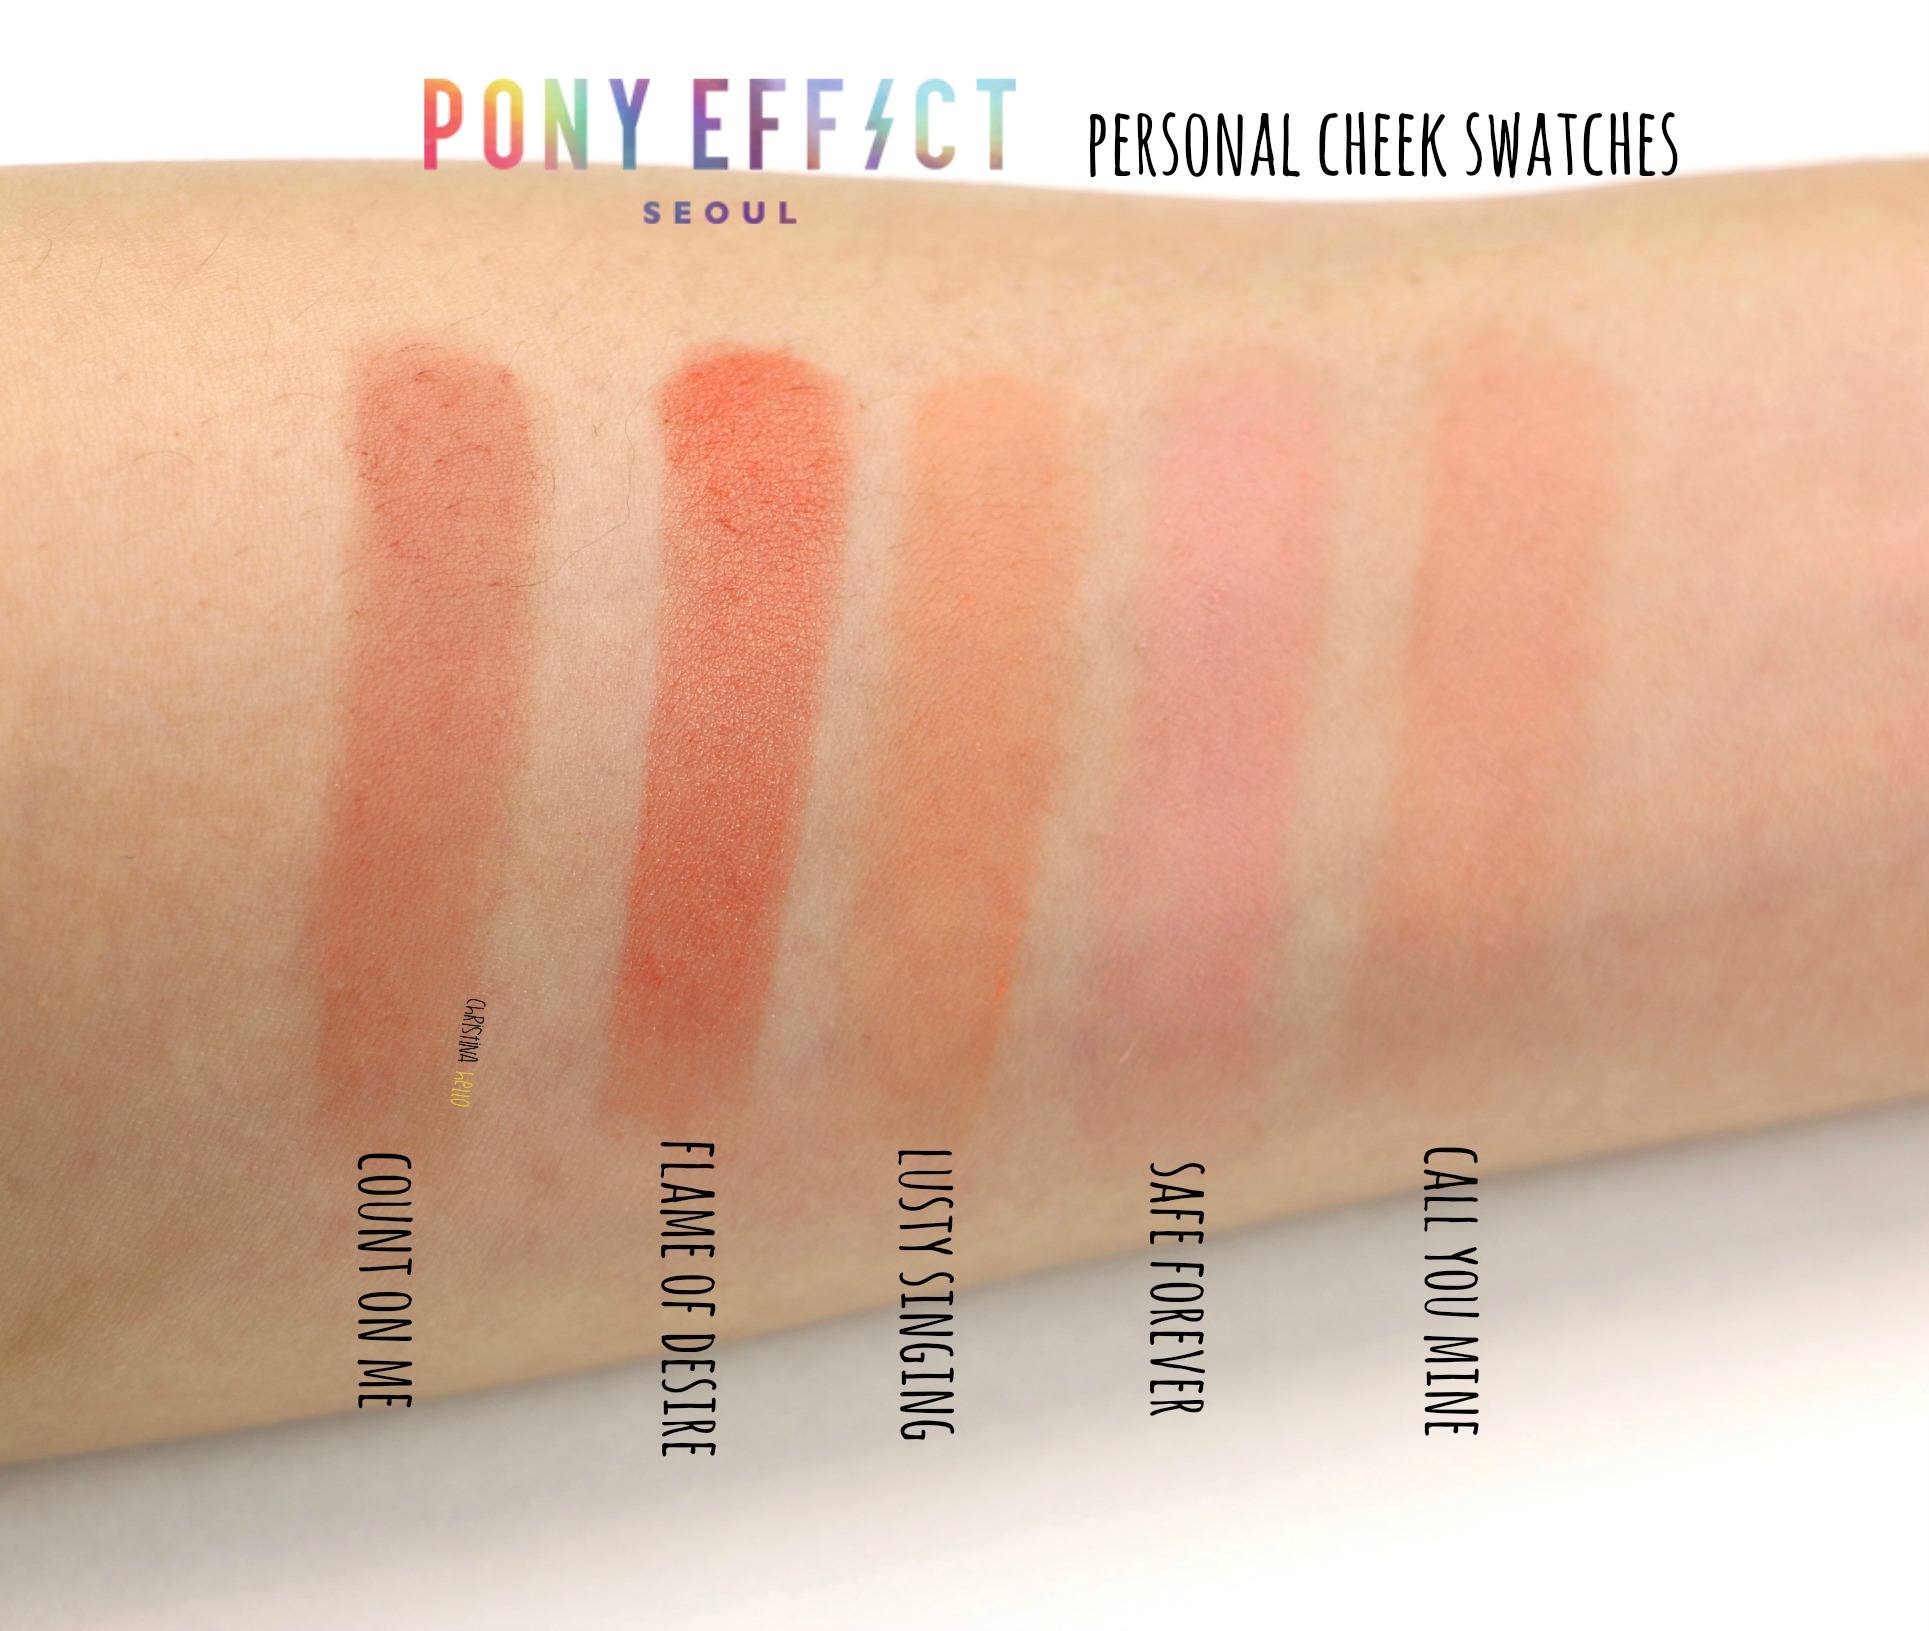 Pony effect personal cheek swatches